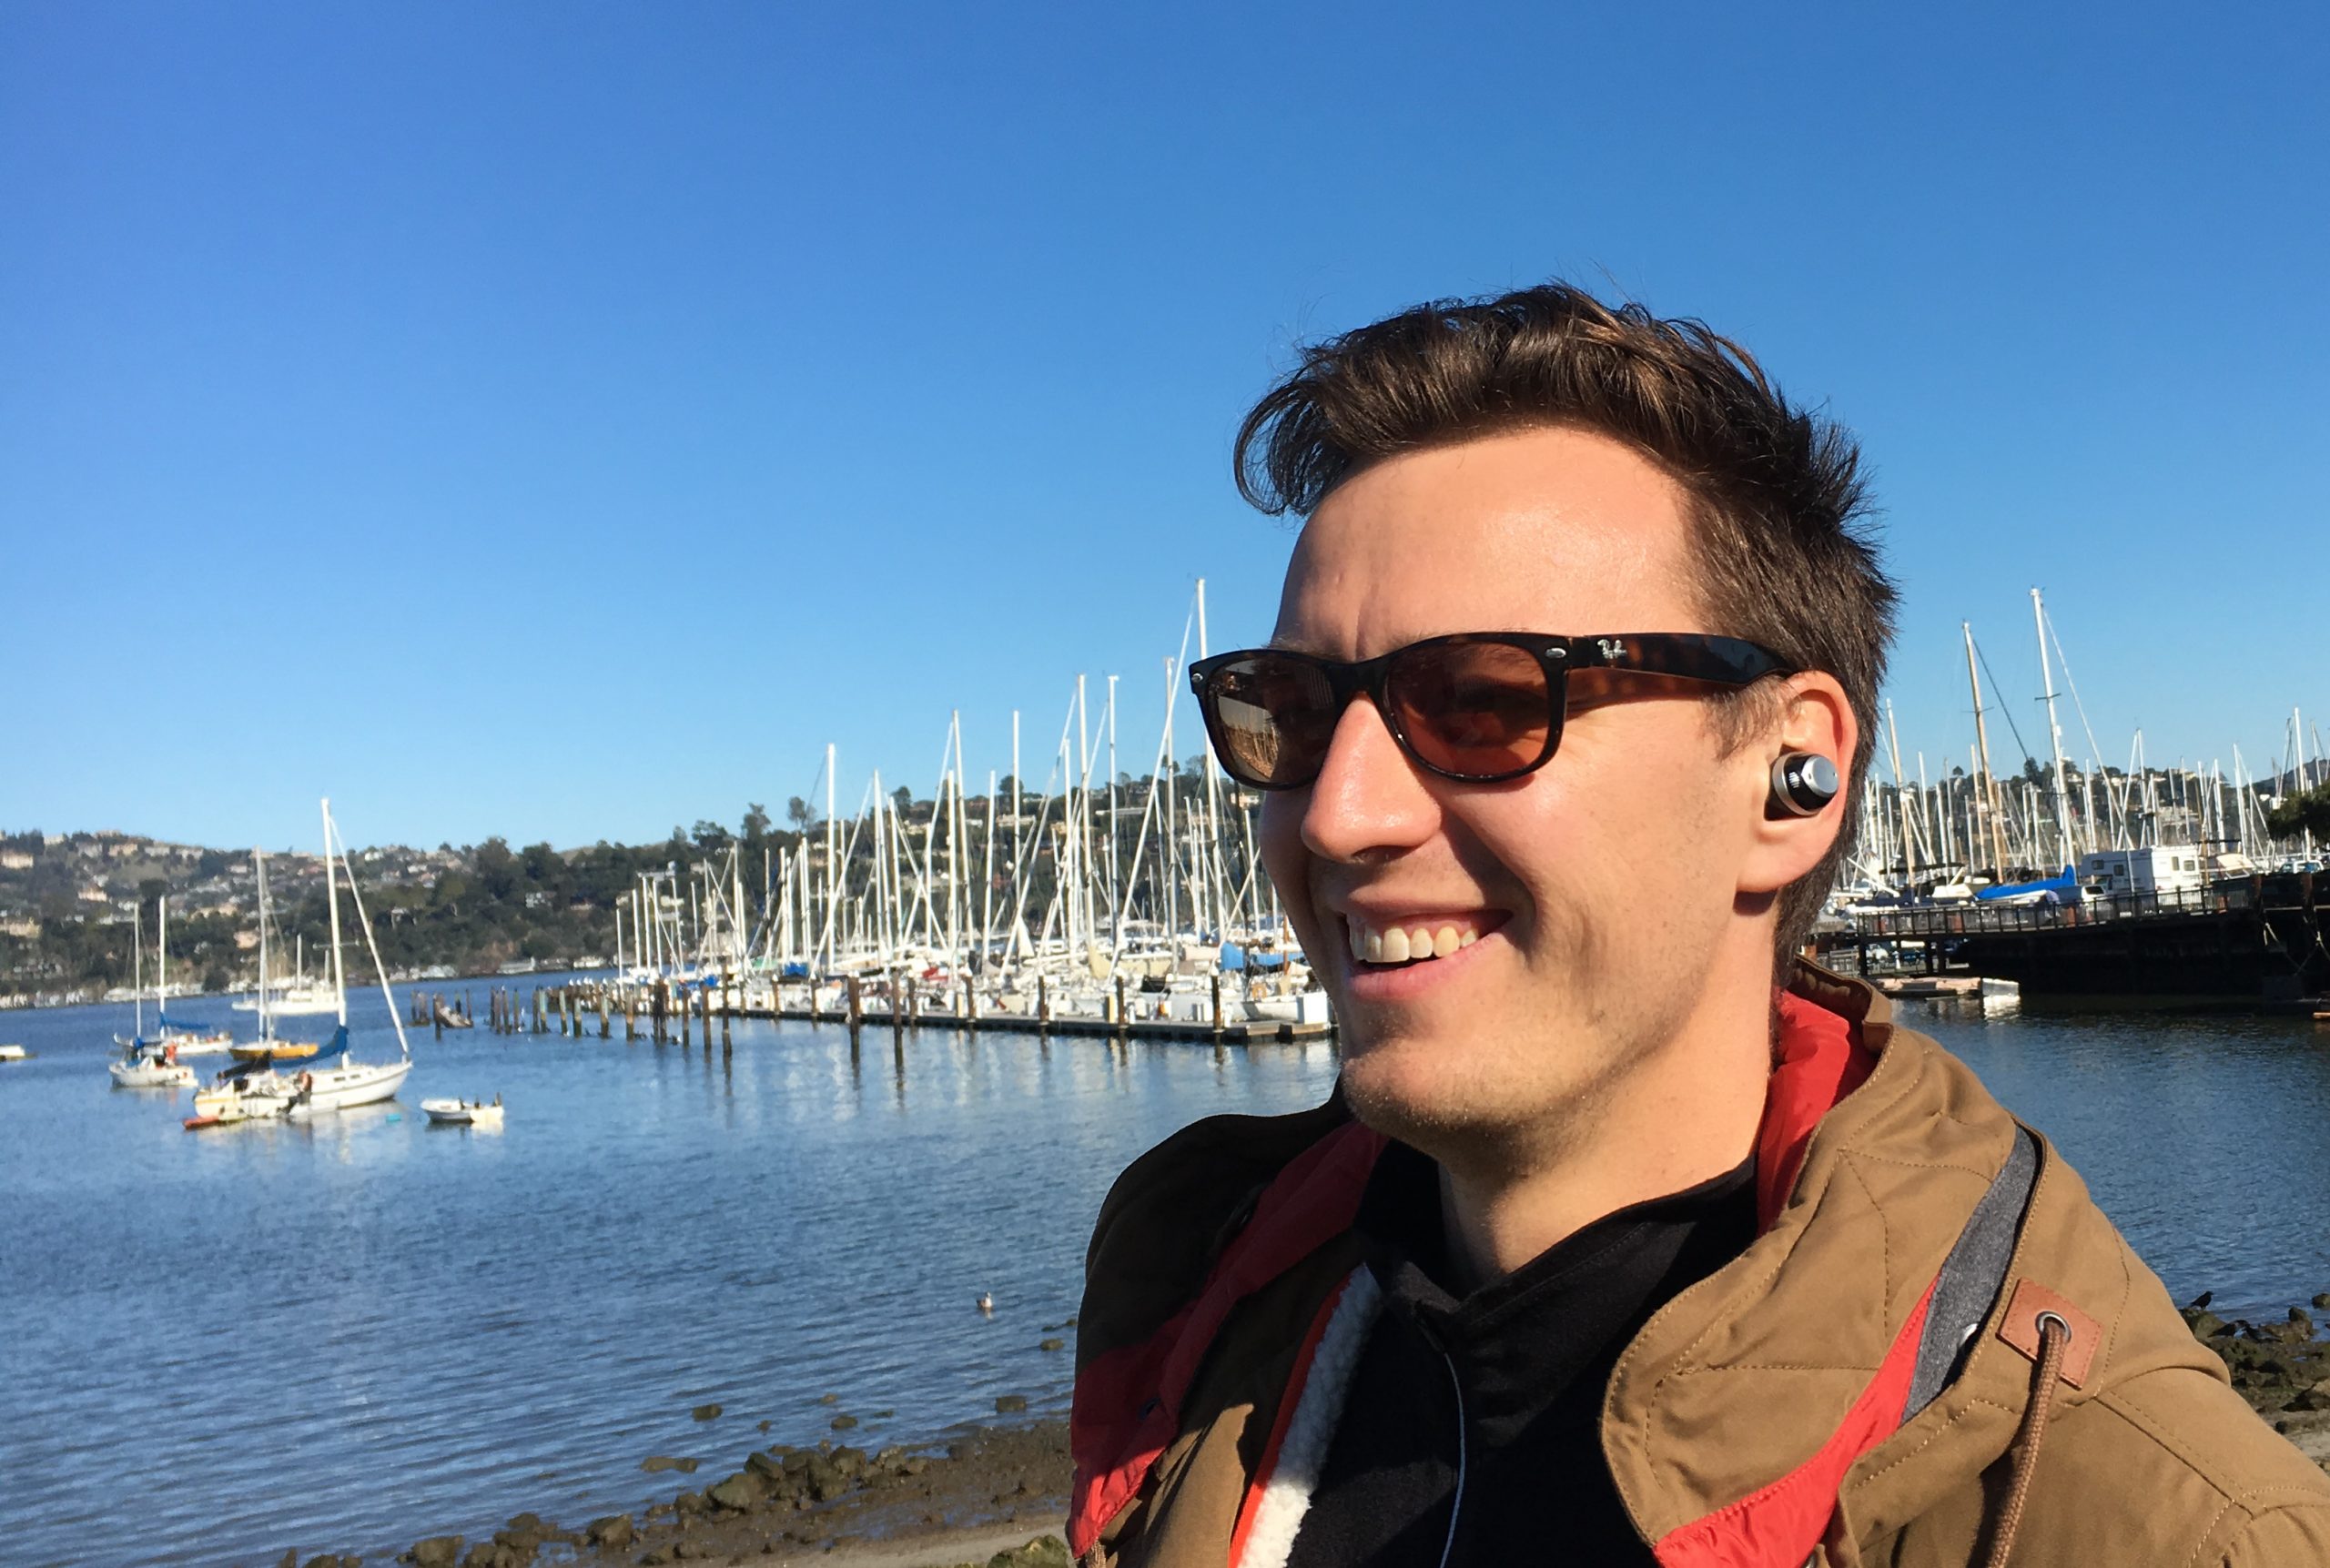 Early Reviews of IQbuds™ Validate Life-Changing Technology